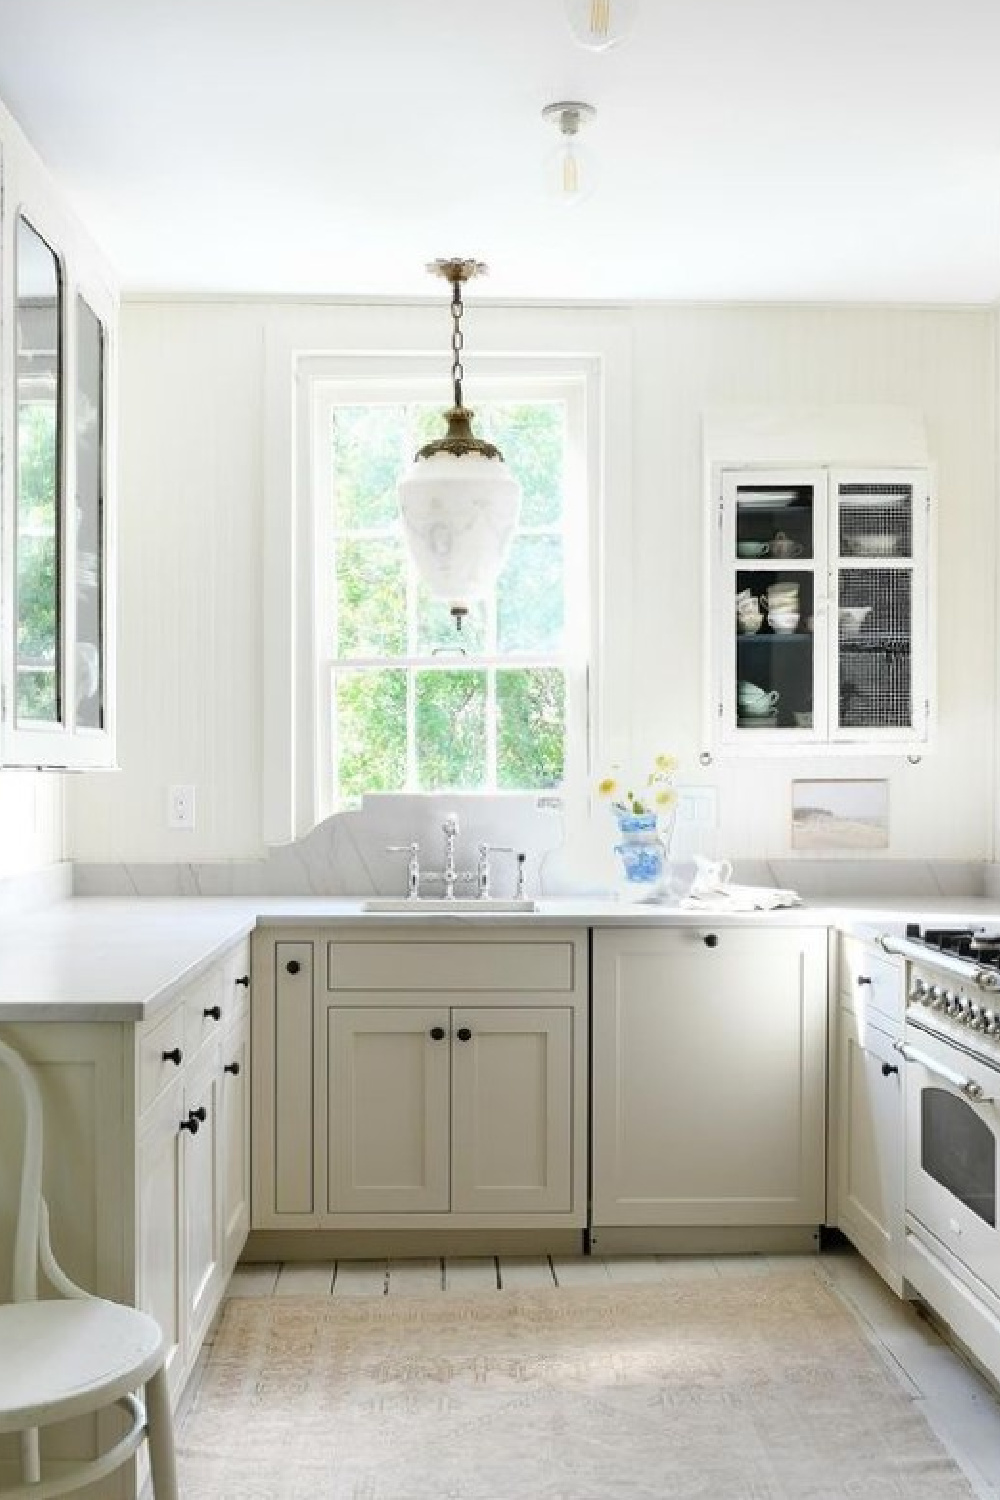 Leanne Ford Designed white serene kitchen with area rug and oversized pendant over sink.